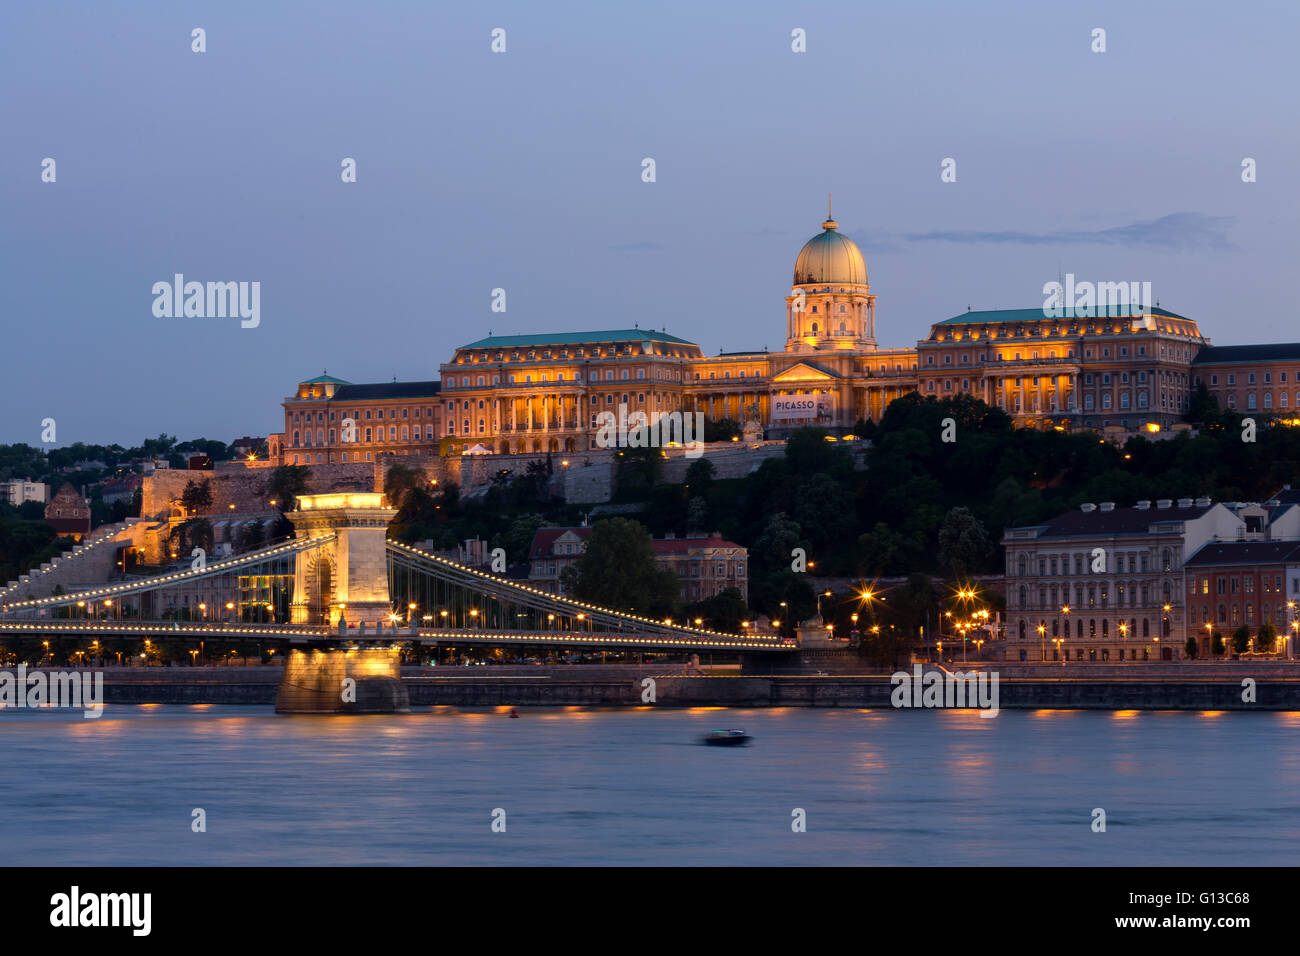 View of Chain Bridge and Castle Hill with National Gallery during Picasso exhibition in Budapest at dusk Stock Photo